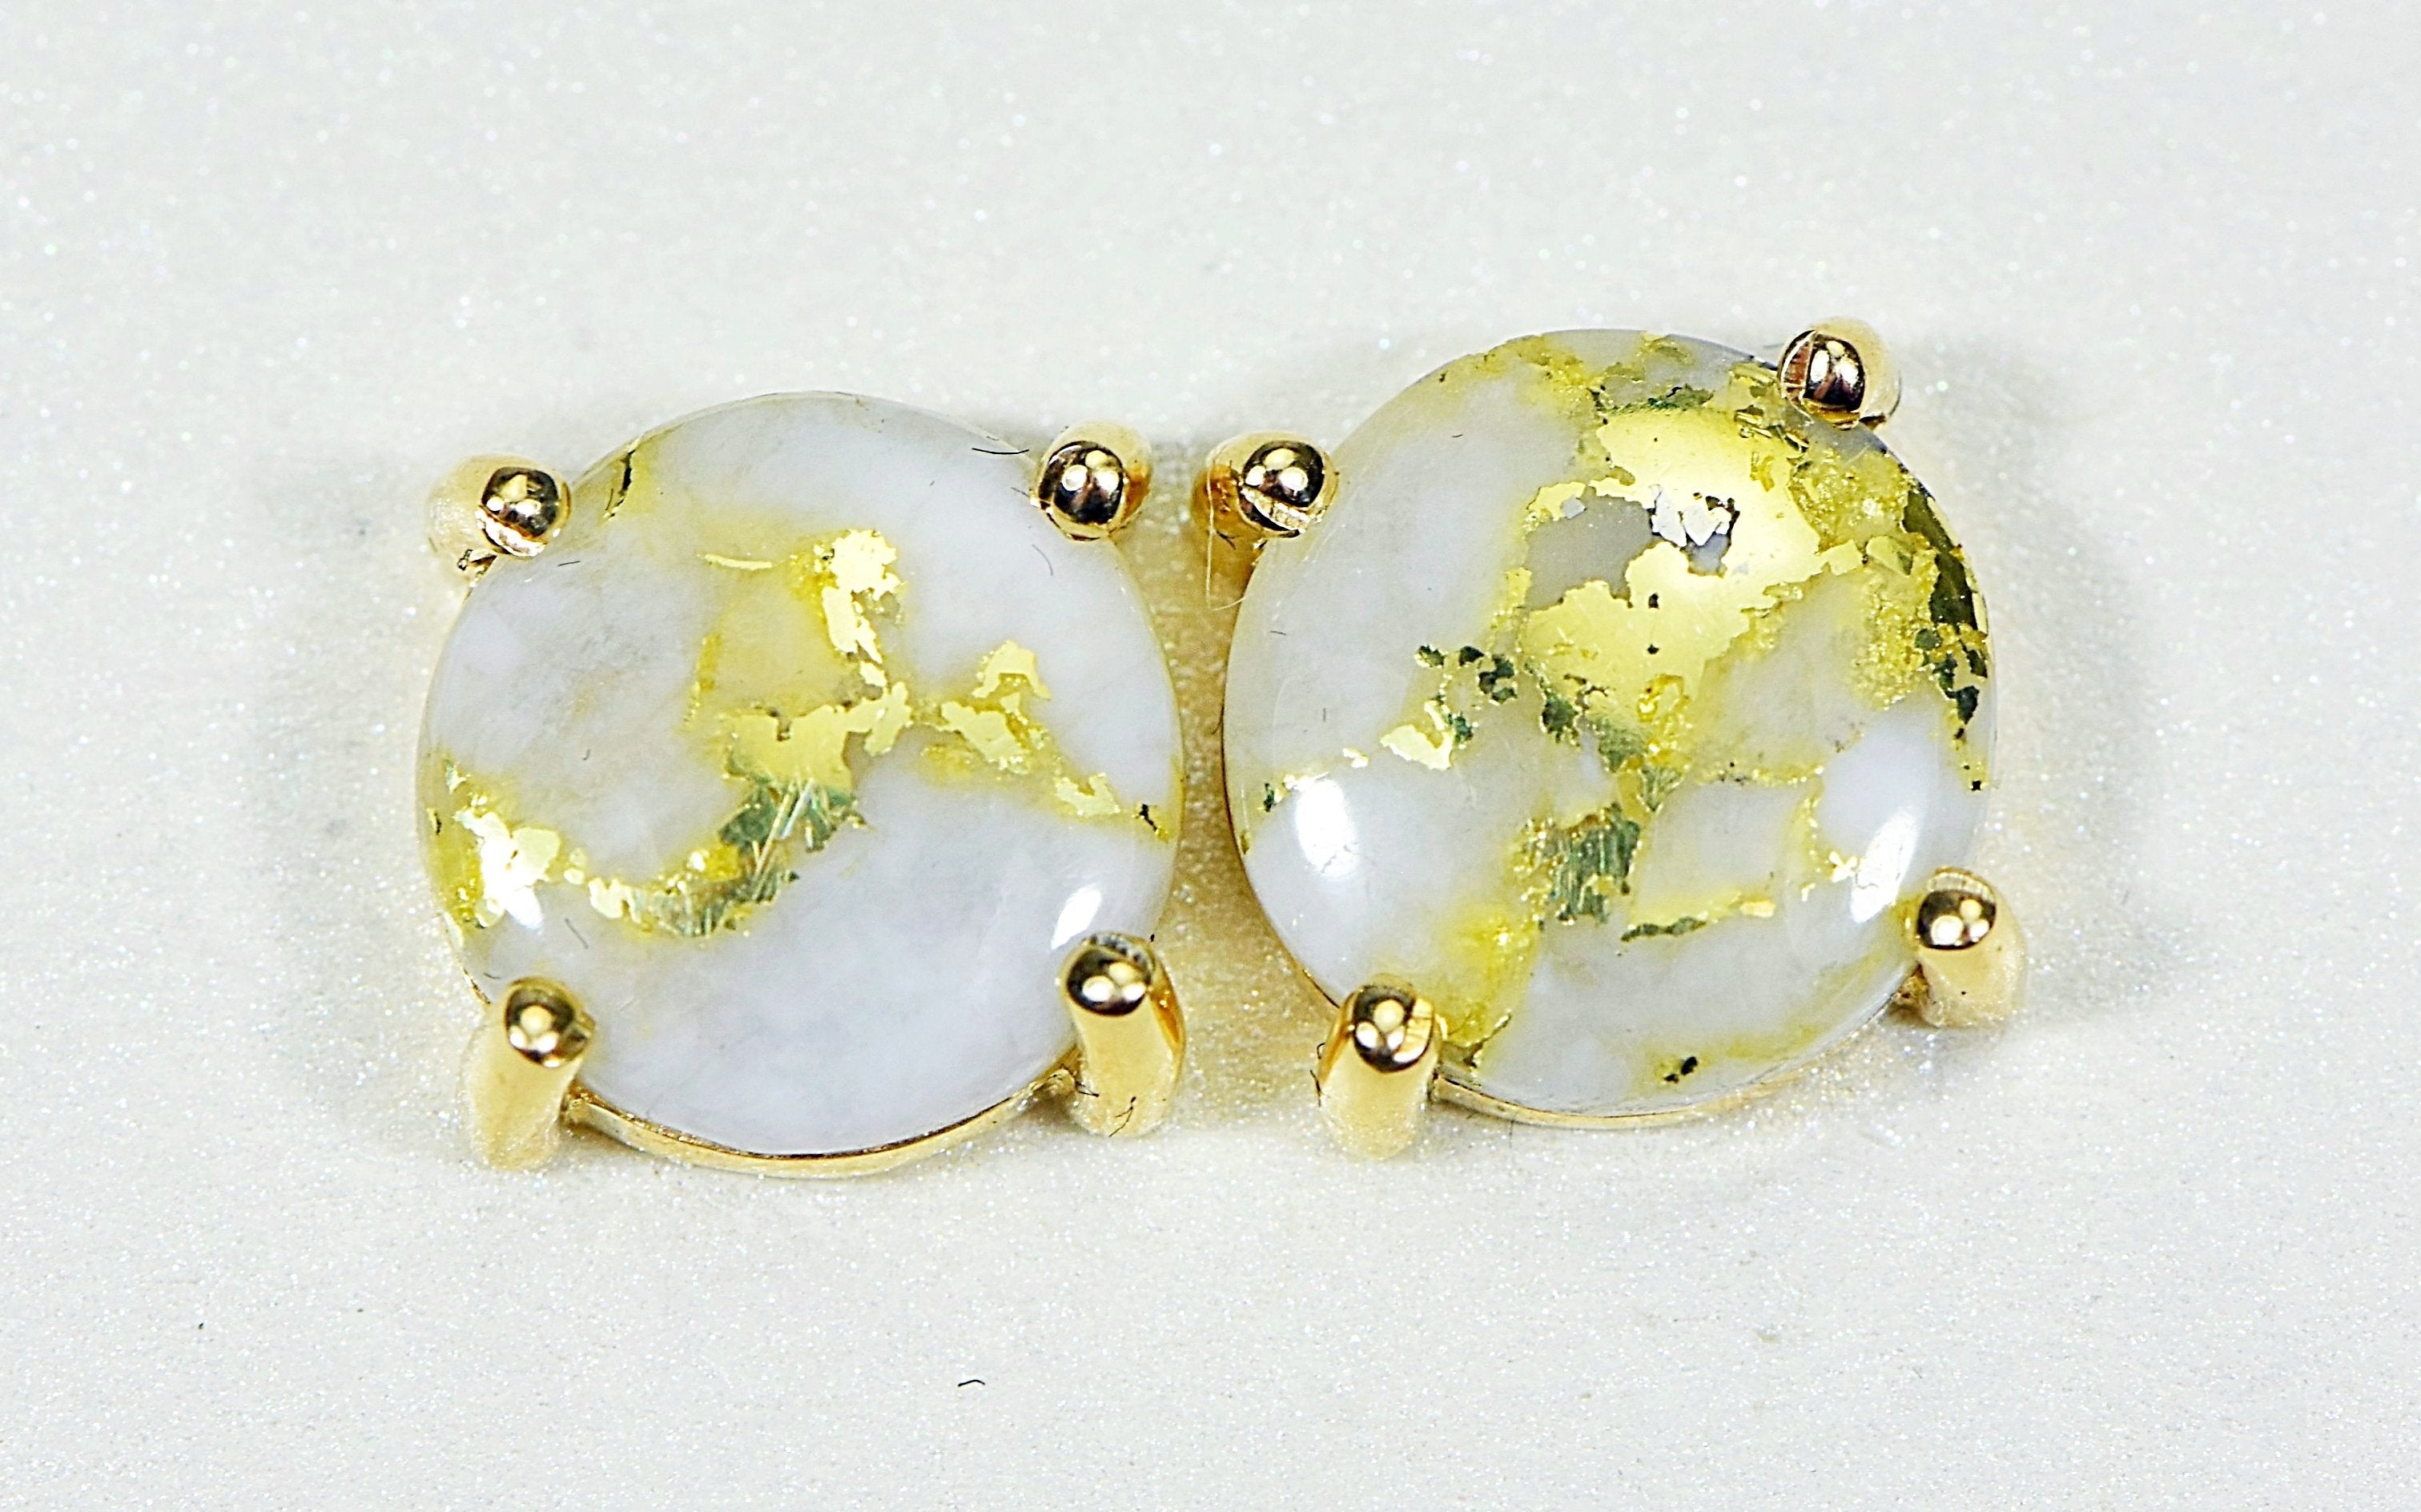 Gold Quartz Earrings "Orocal" E8MMQ Genuine Hand Crafted Jewelry - 14K Gold Casting